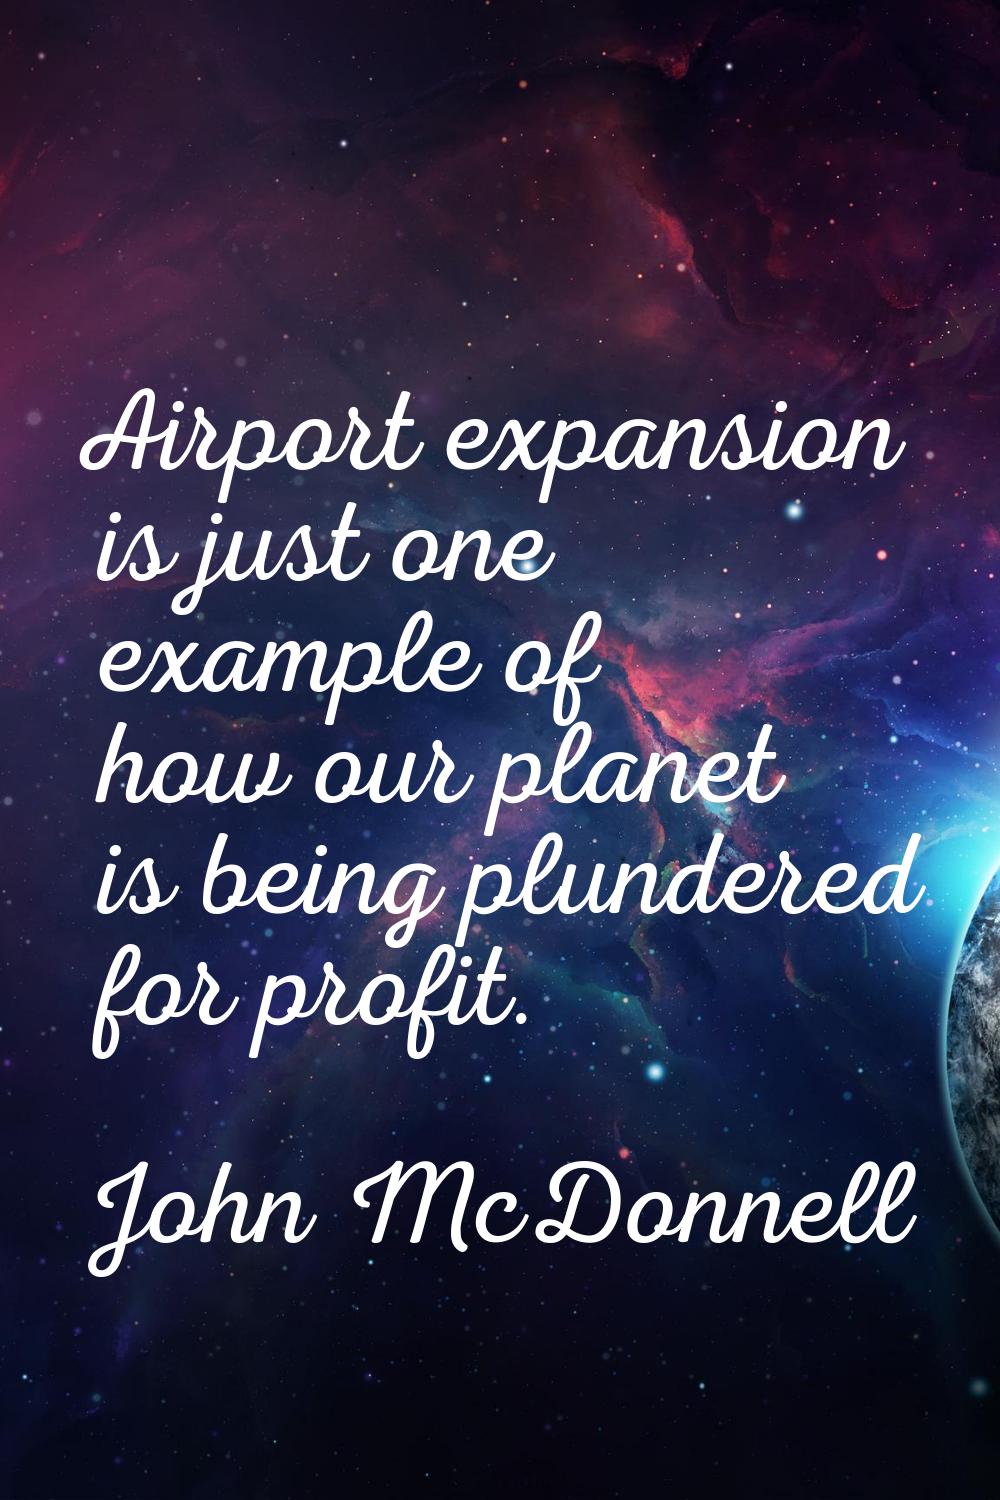 Airport expansion is just one example of how our planet is being plundered for profit.